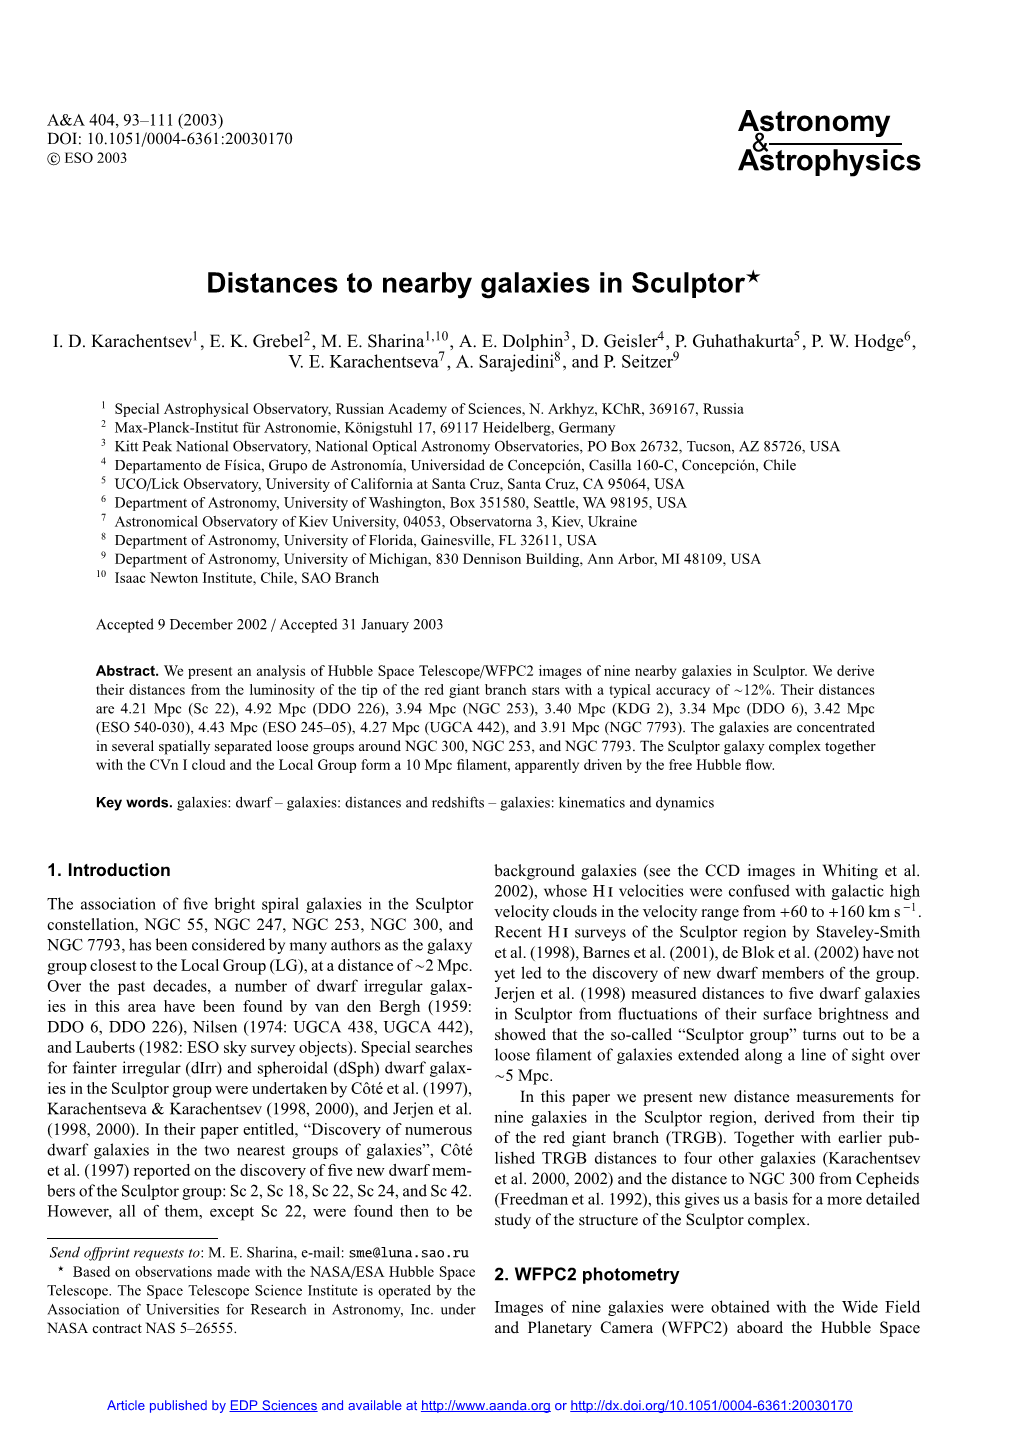 Distances to Nearby Galaxies in Sculptor